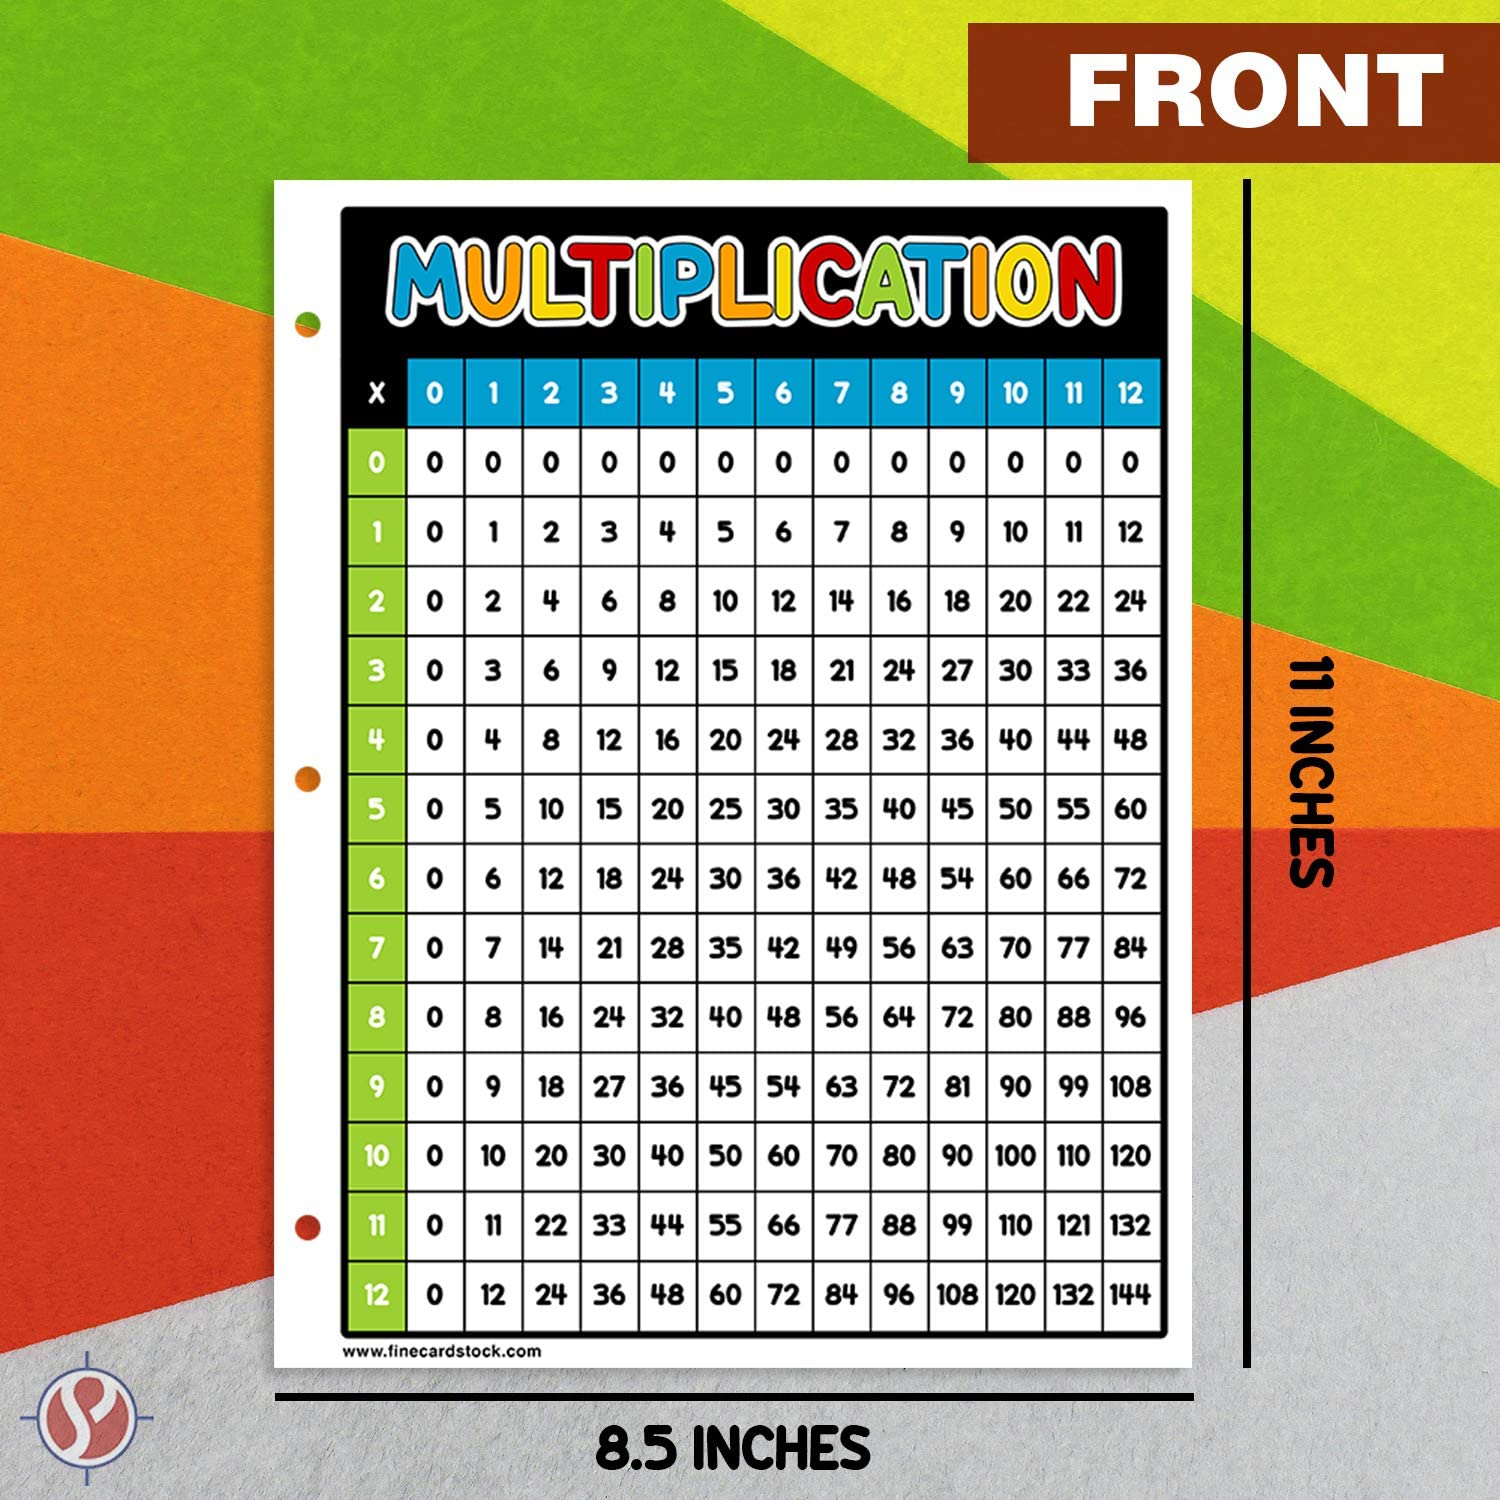 education multiplication chart math table poster a great cards for learning home school children of all ages double side